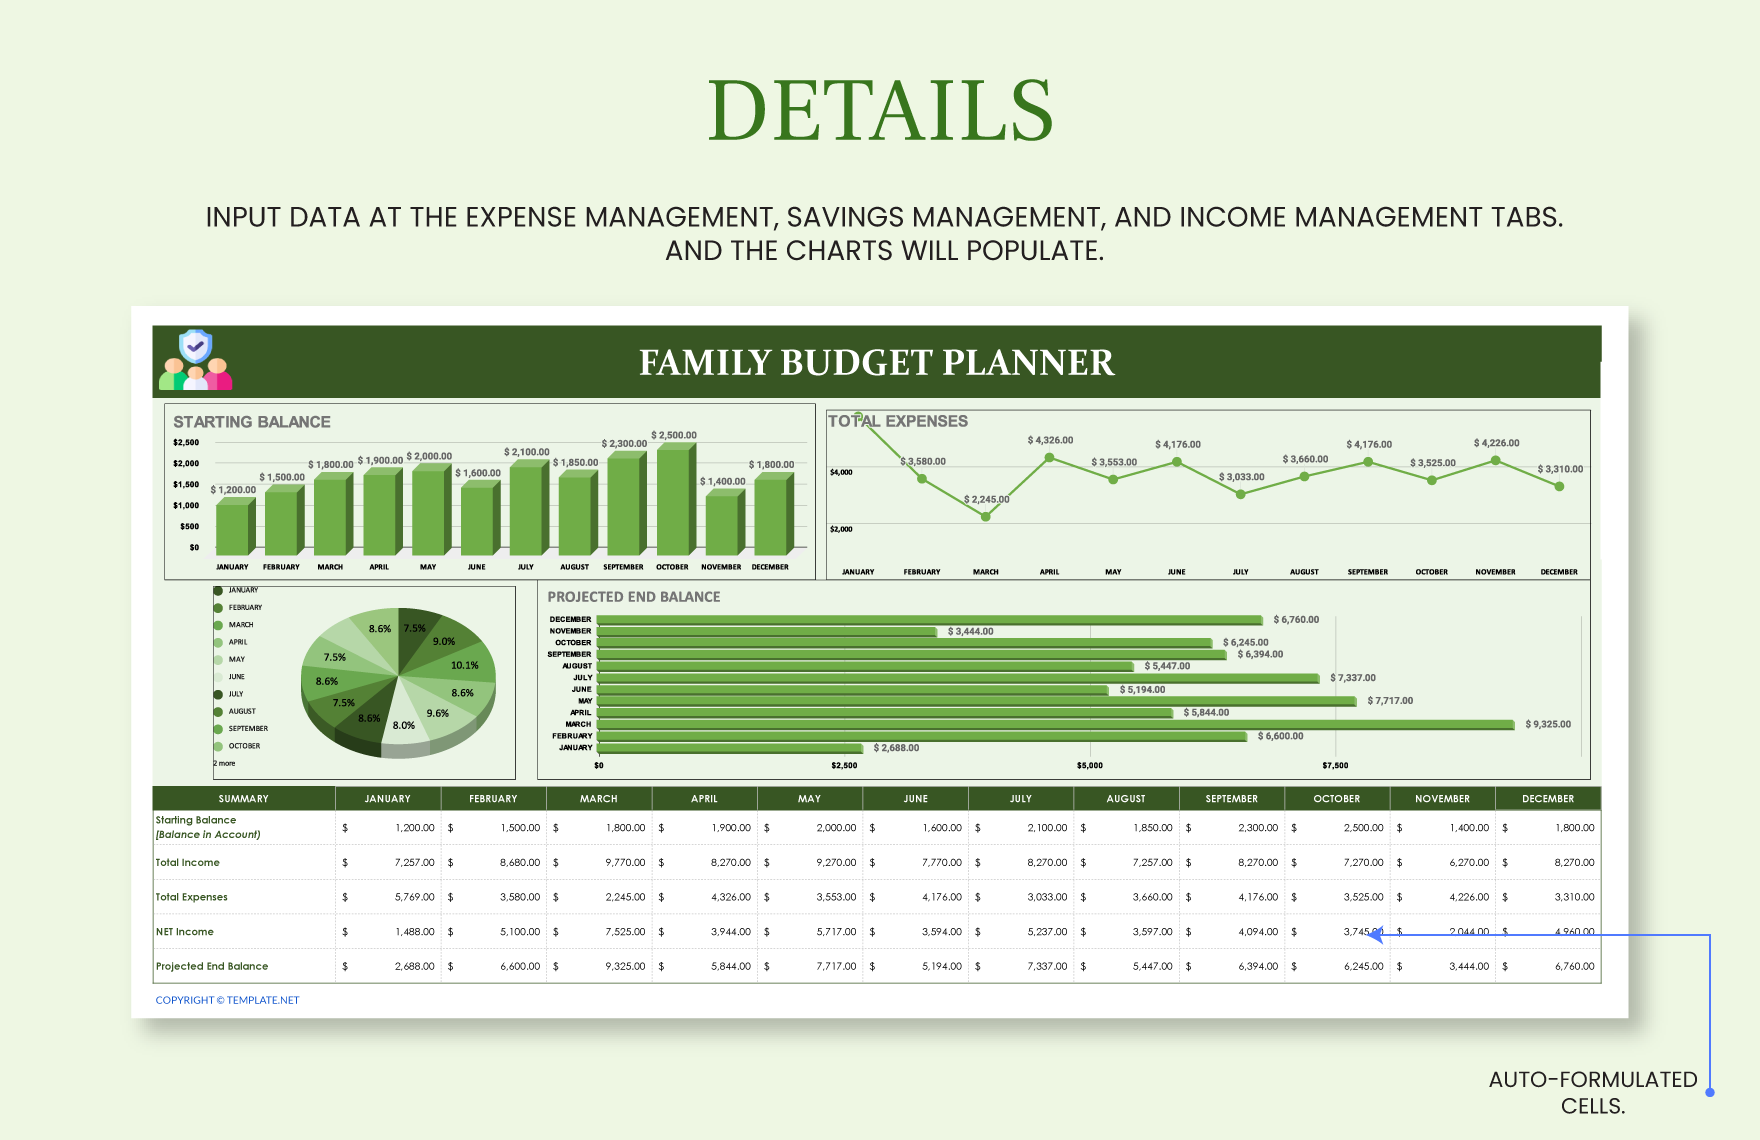 Family Budget Planner Template